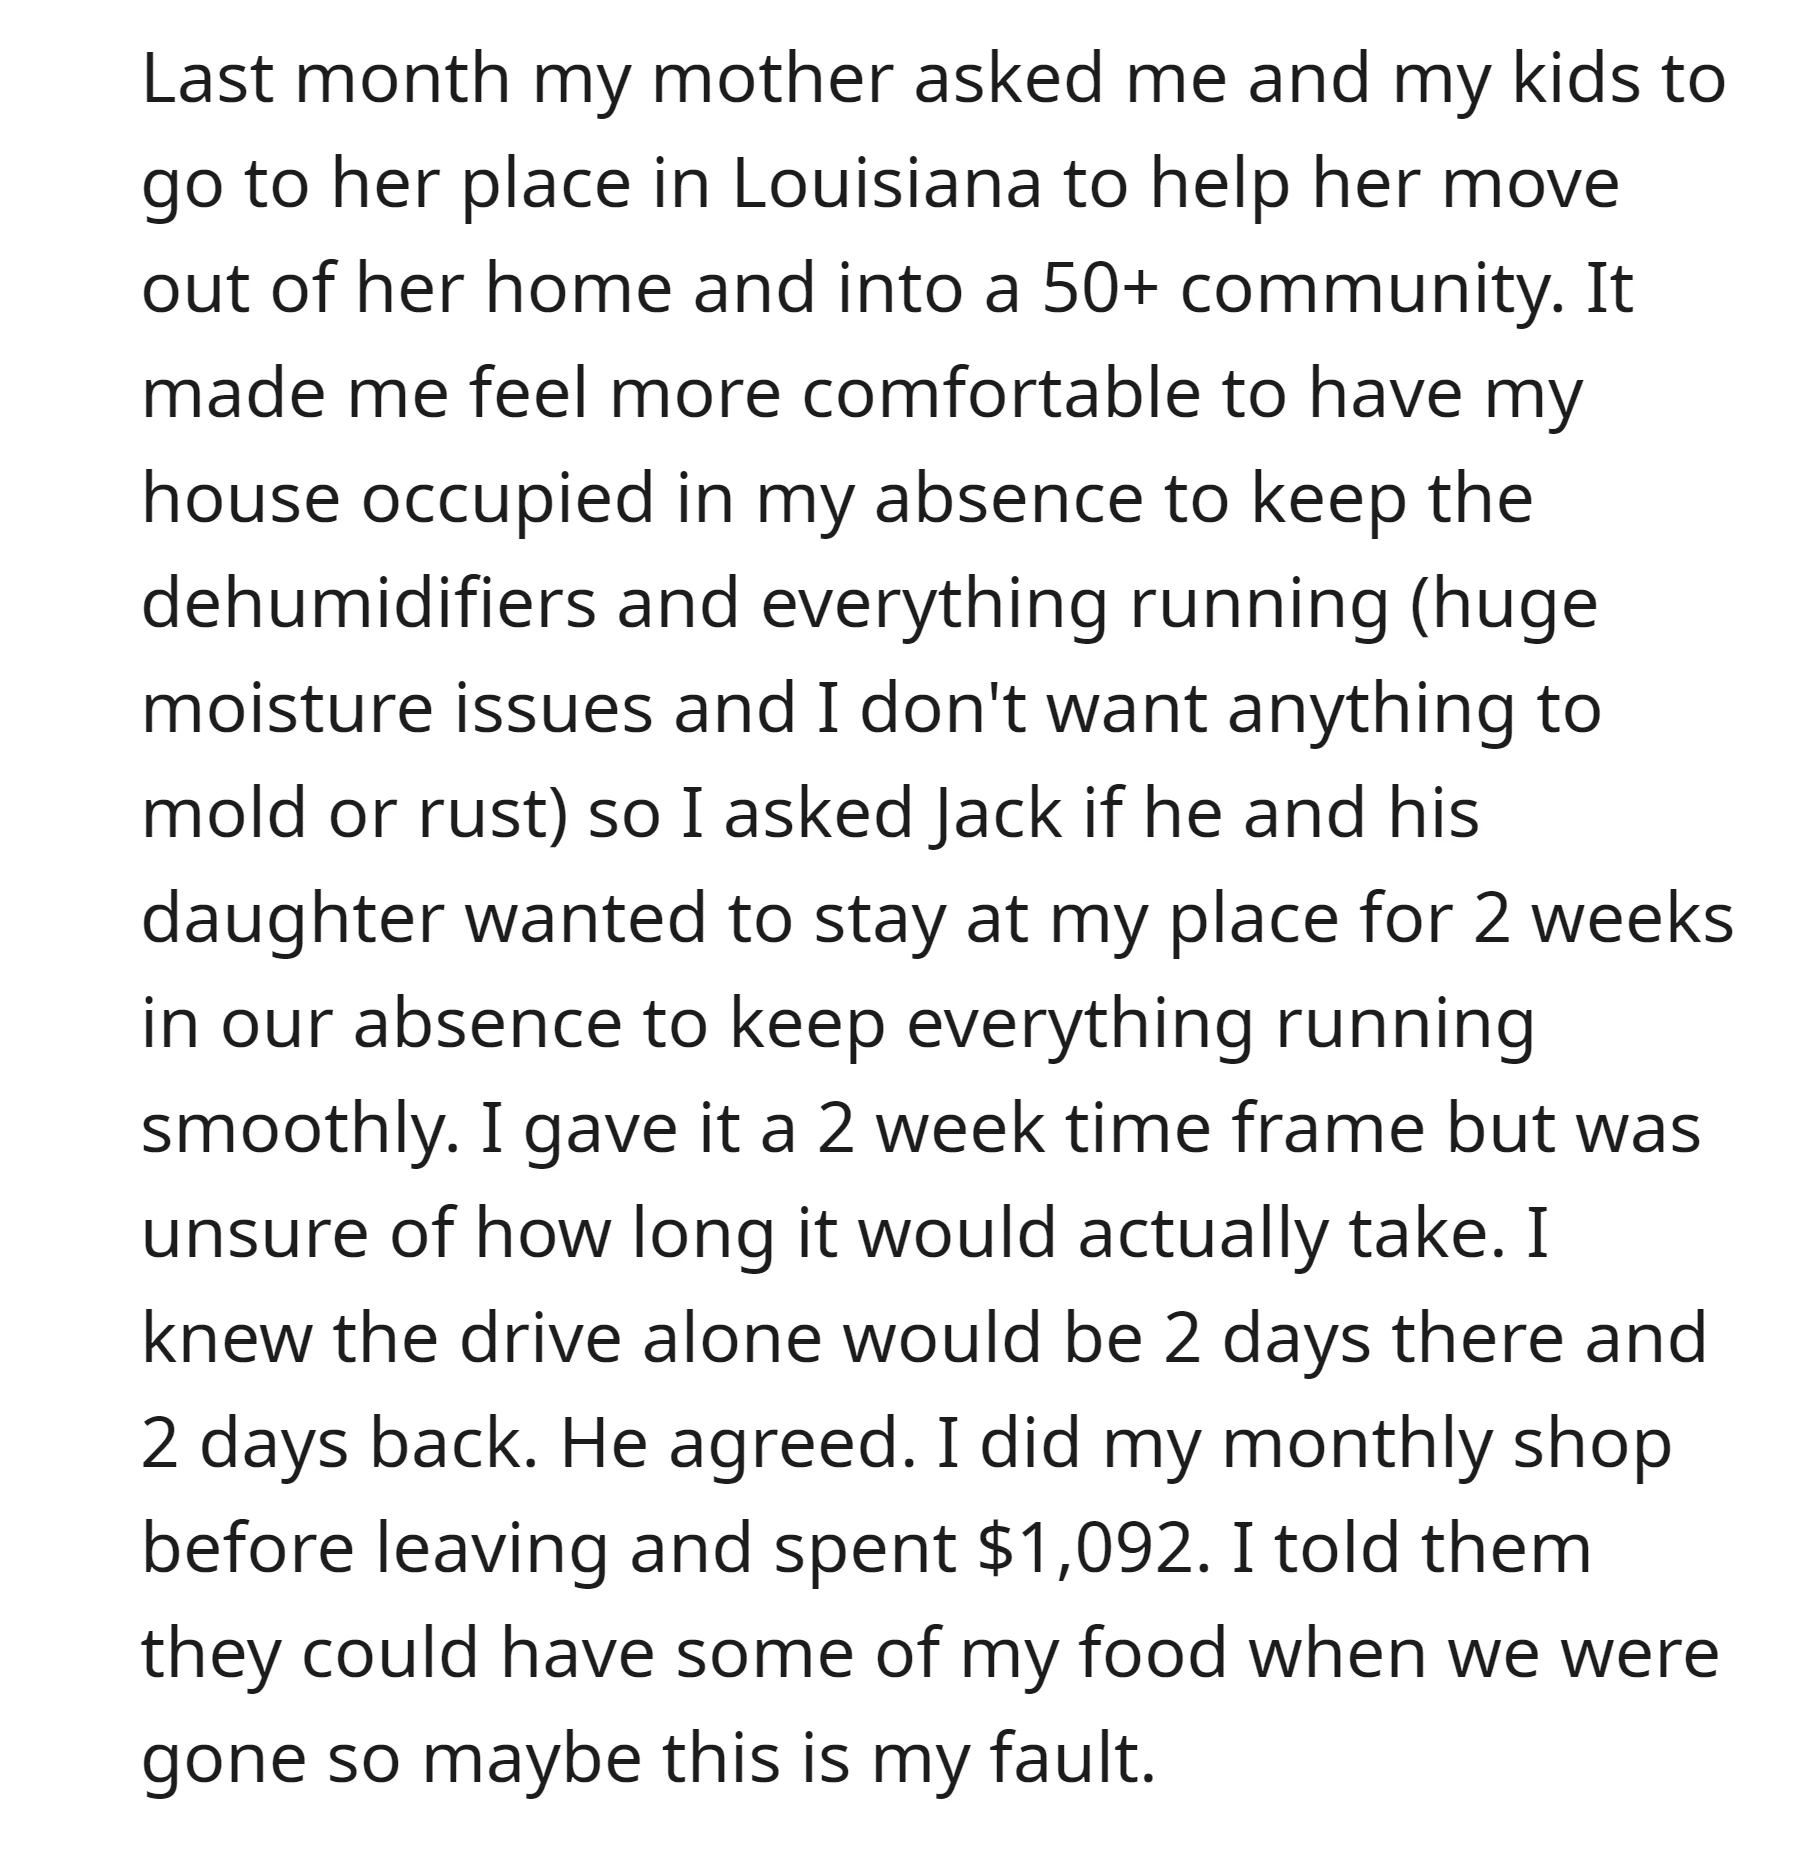 OP invited Jack and his daughter to stay at their house for two weeks, she left them some food worth $1,092